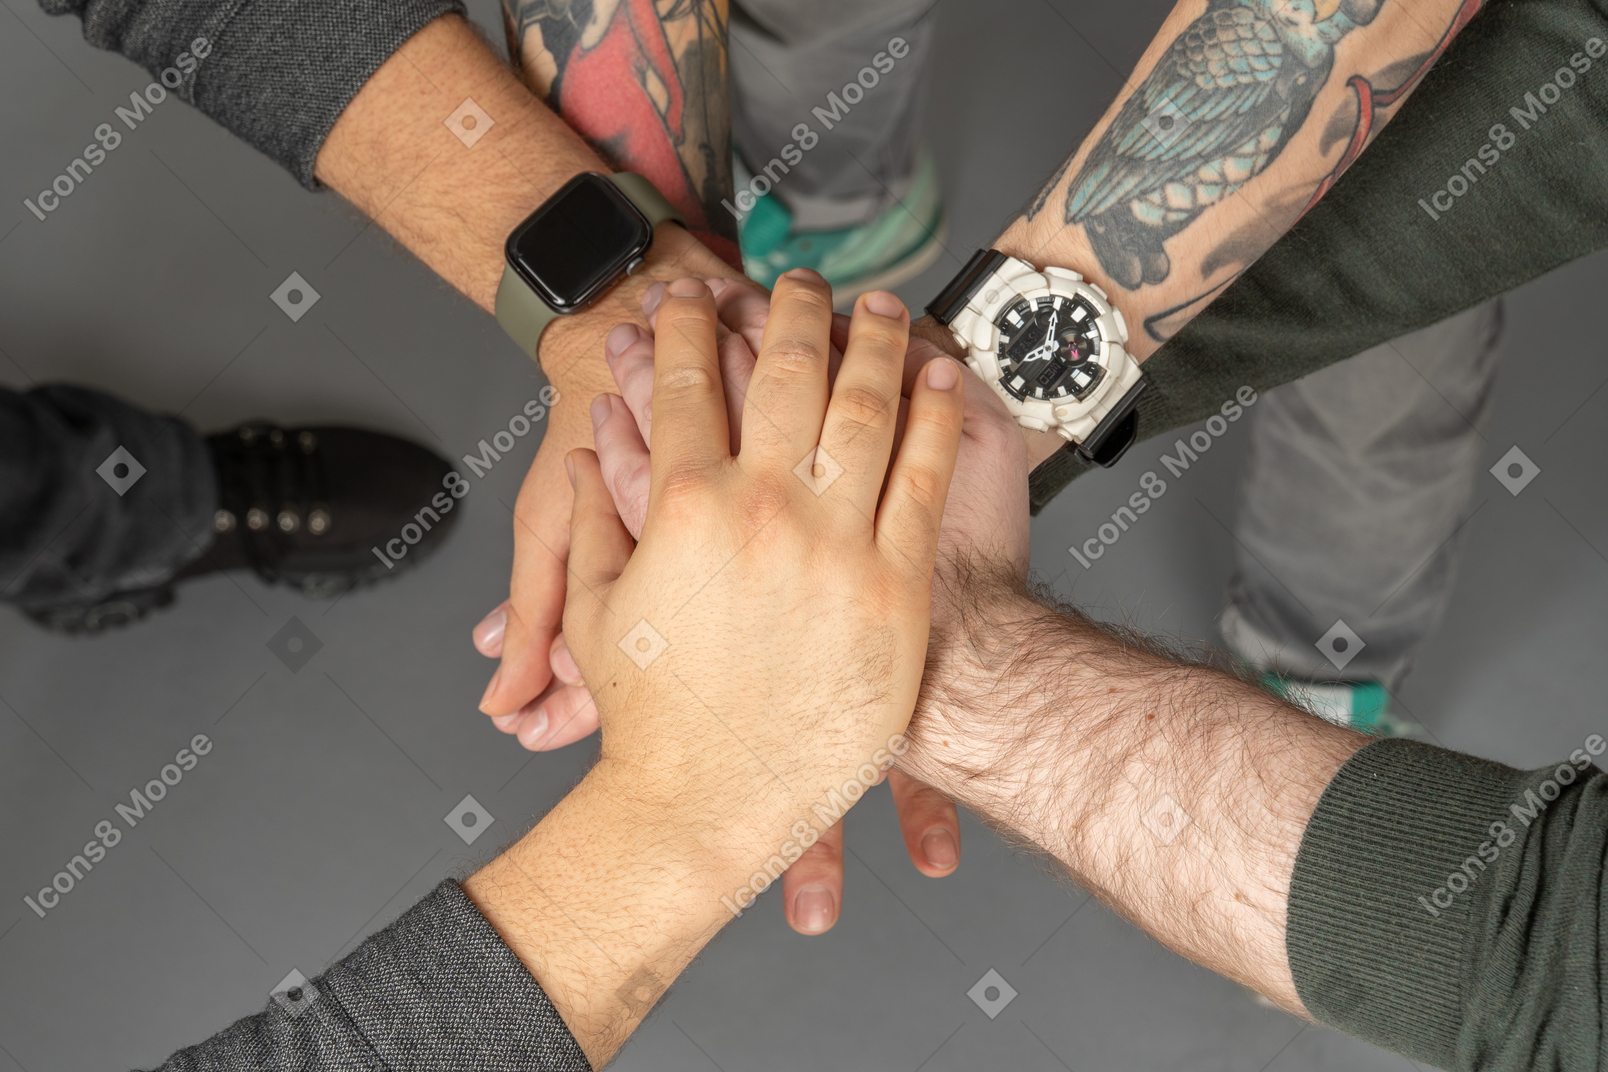 Hands with watches joint together